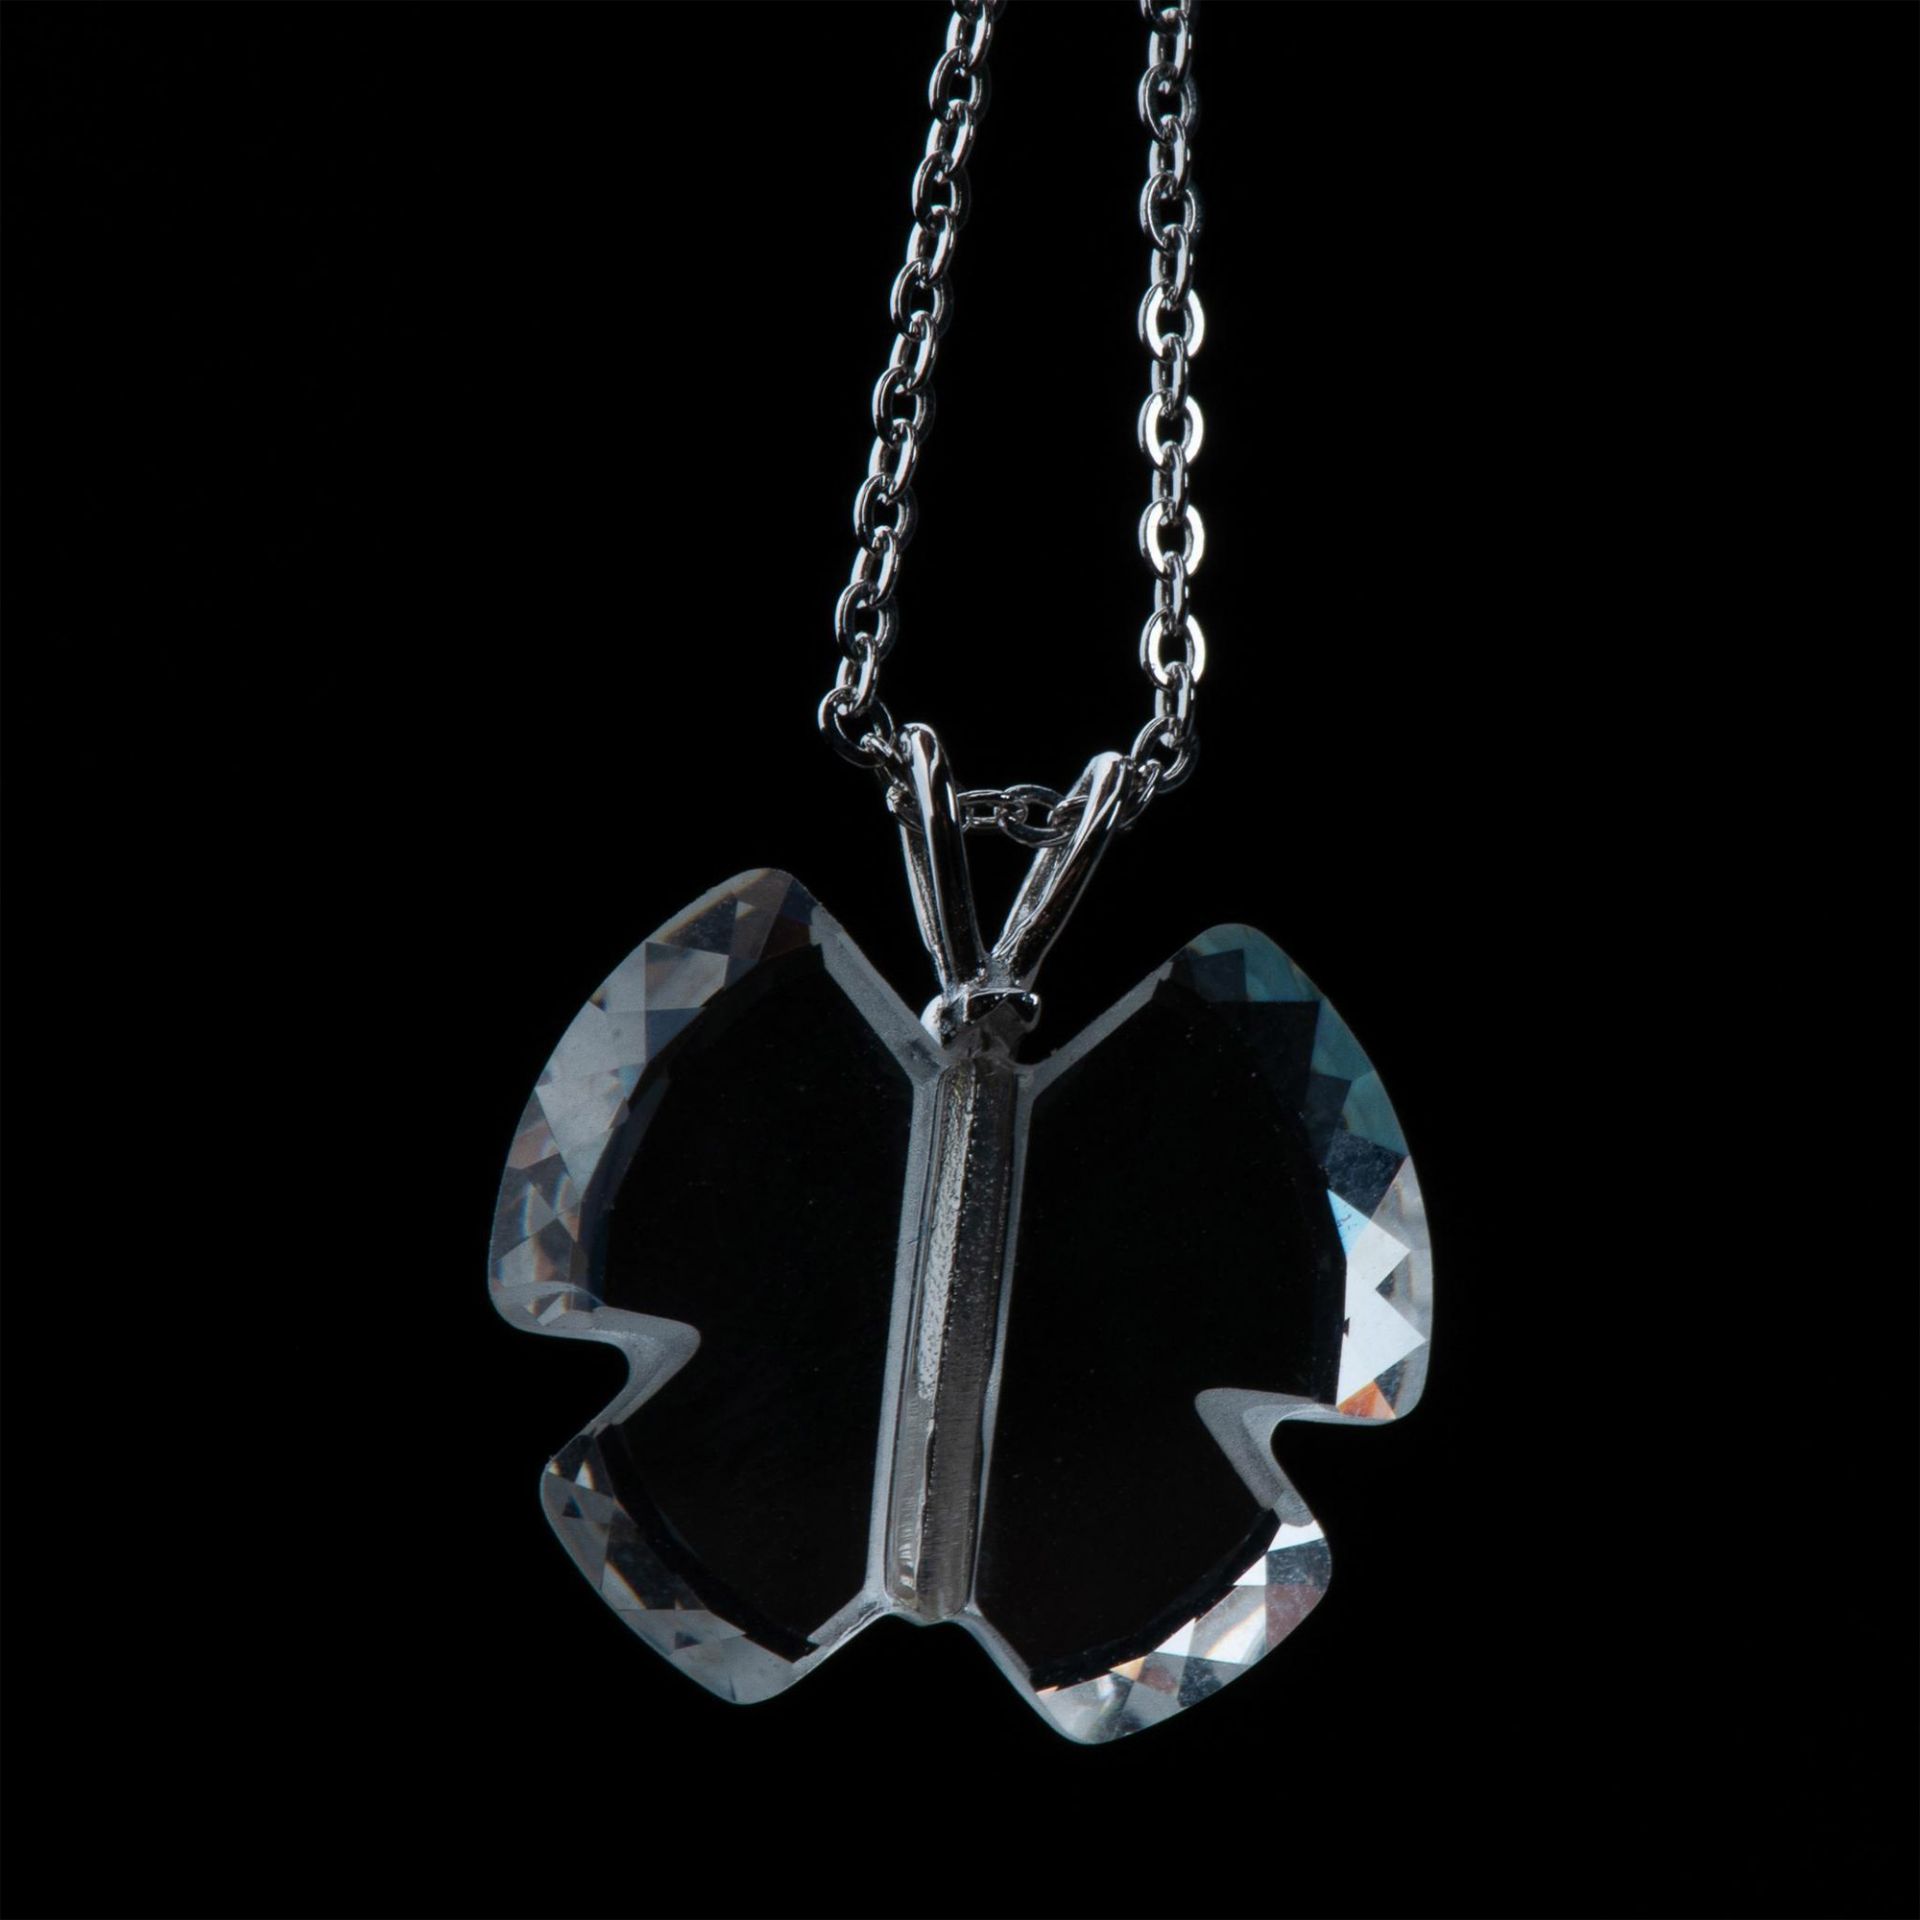 Gorham Sterling Silver & Crystal Butterfly Necklace - Image 4 of 4